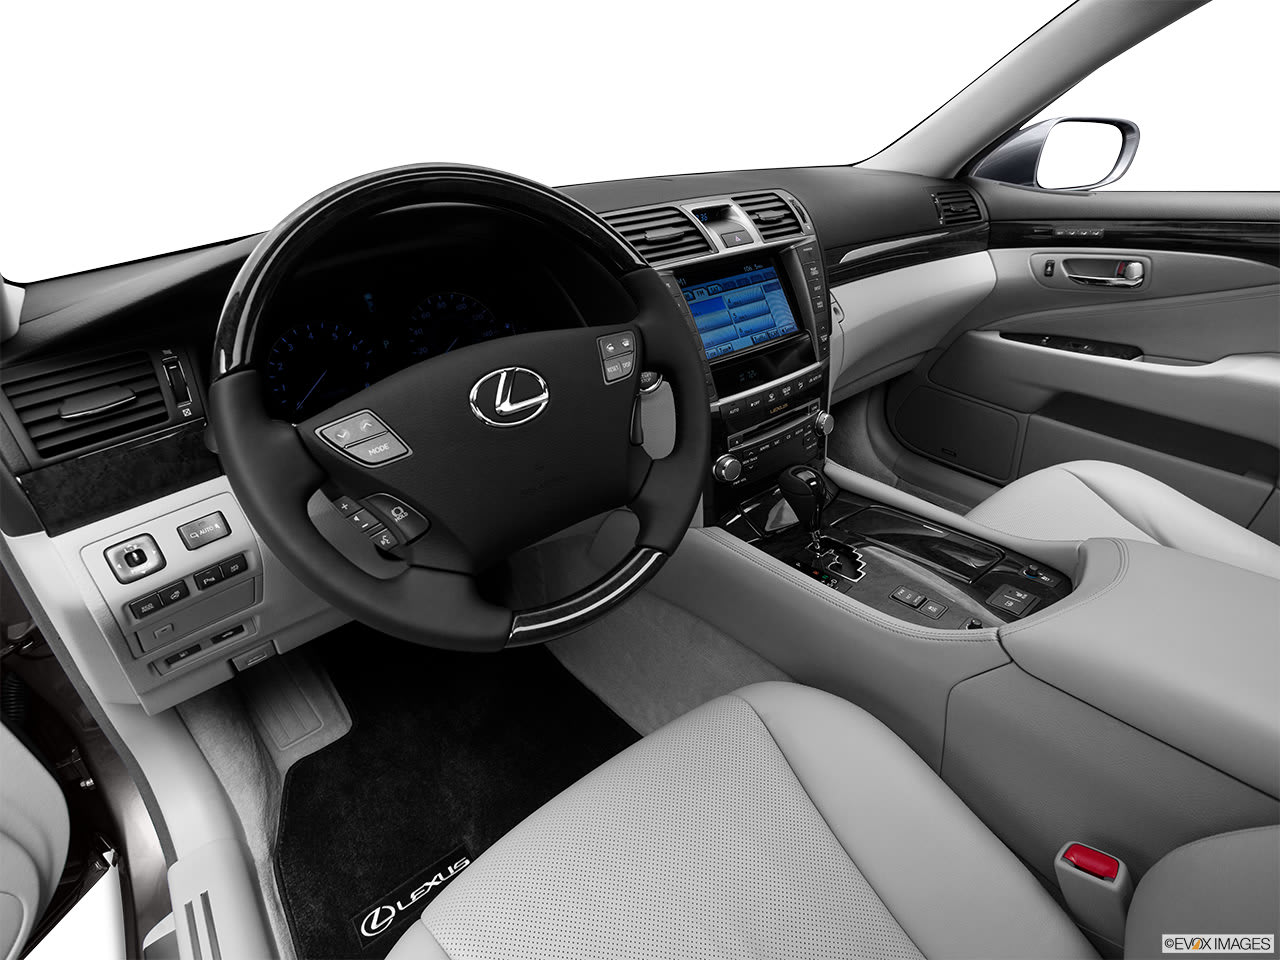 A Buyer's Guide to the 2012 Lexus LS | YourMechanic Advice